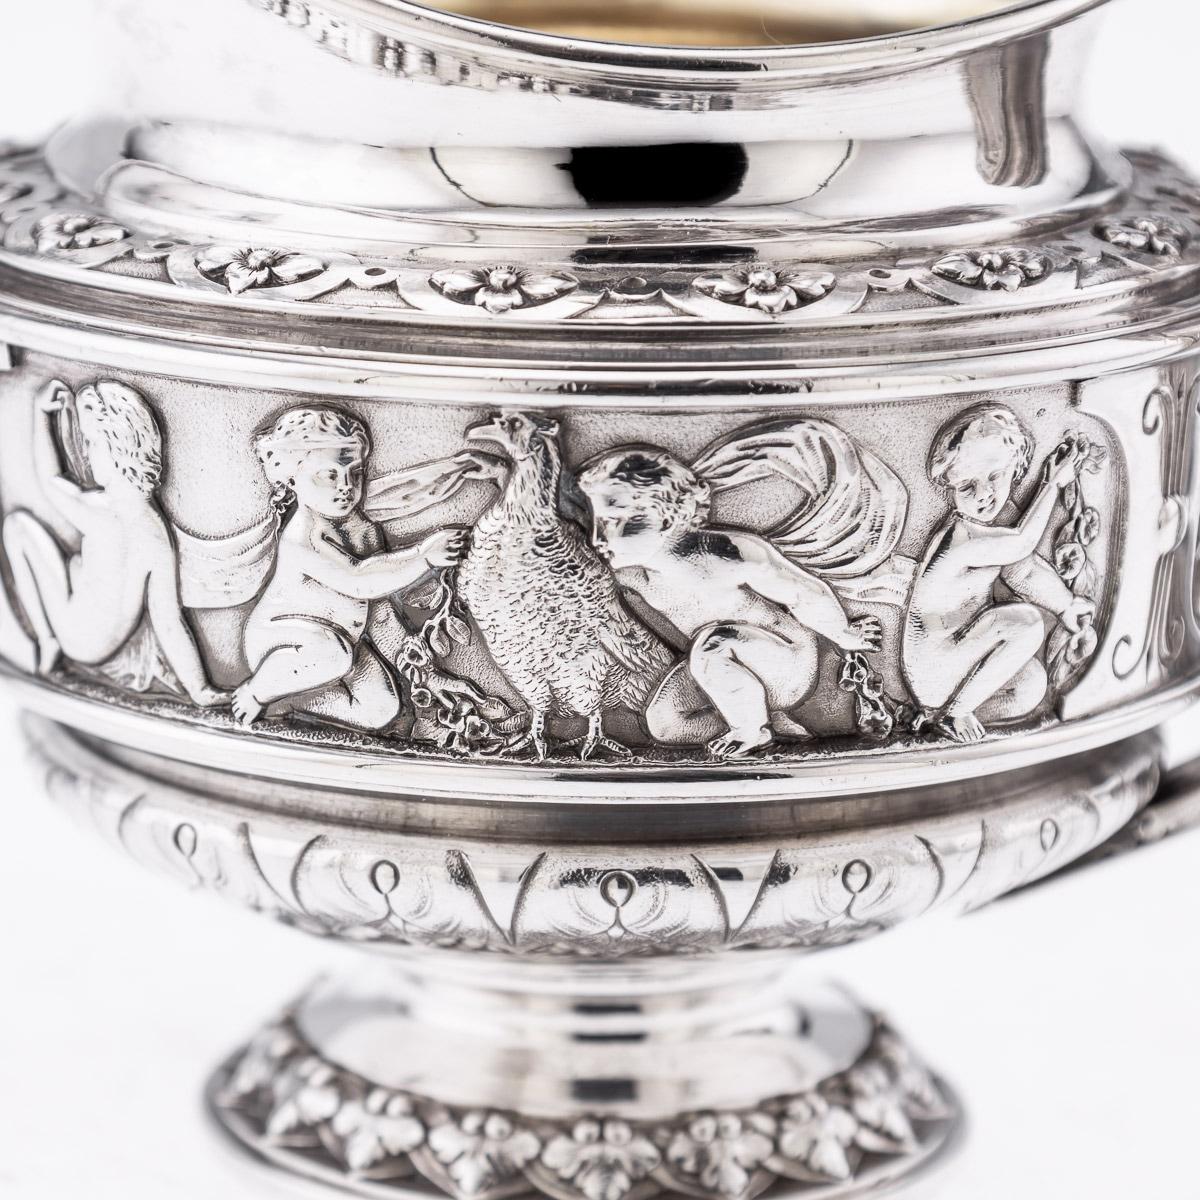 19th Century French Solid Silver Tea Service on Tray, Odiot, Paris, c.1860 13